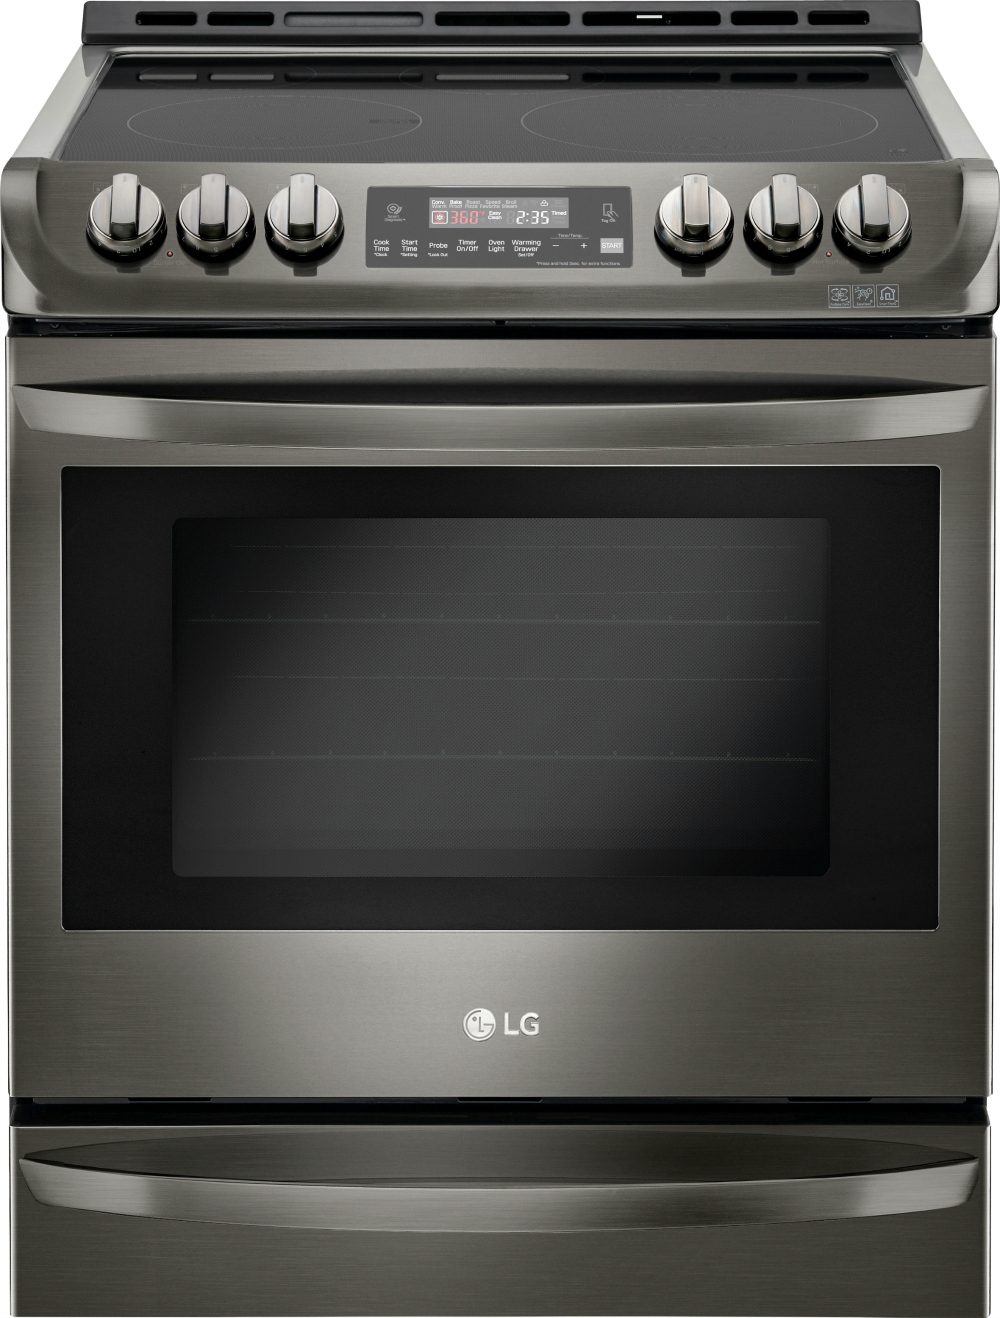 Save on LG Appliances at the Best Buy Remodeling Sales Event